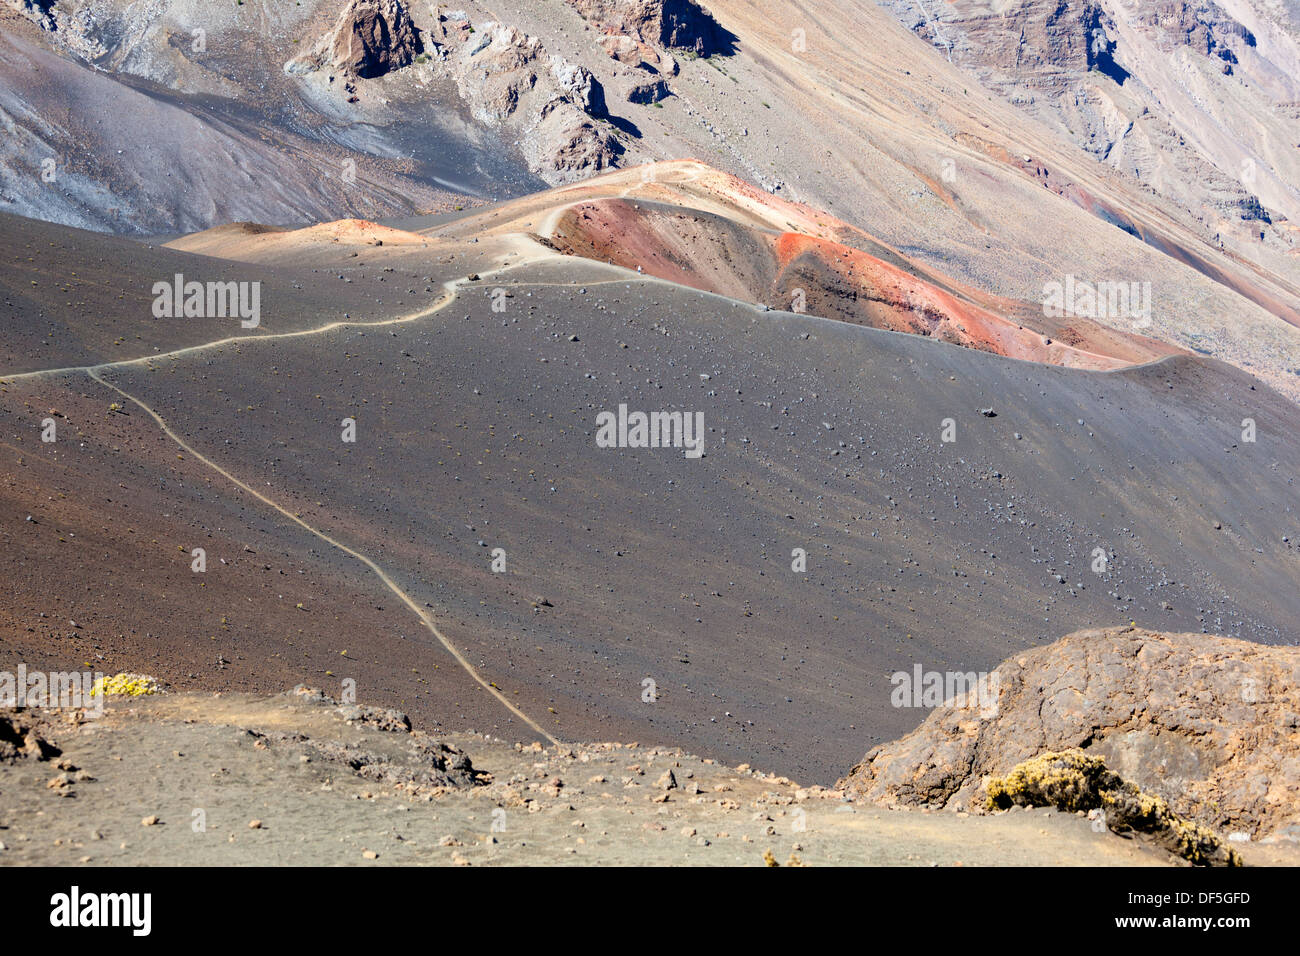 A cinder cone and trails inside the large Haleakala crater in Maui, Hawaii. Stock Photo